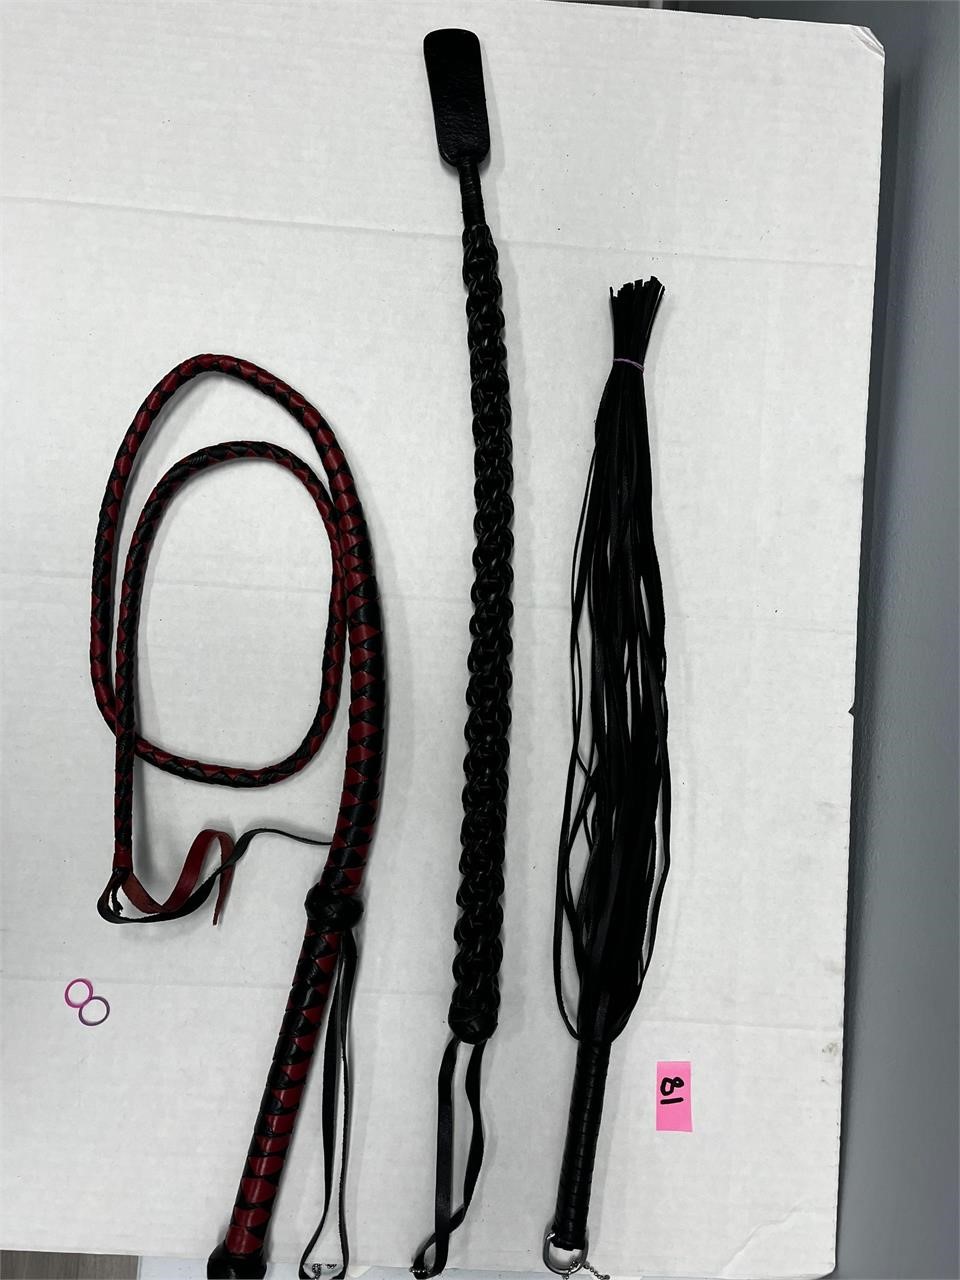 3 Genuine Leather Whips- Flogger, Adult Toy, New $